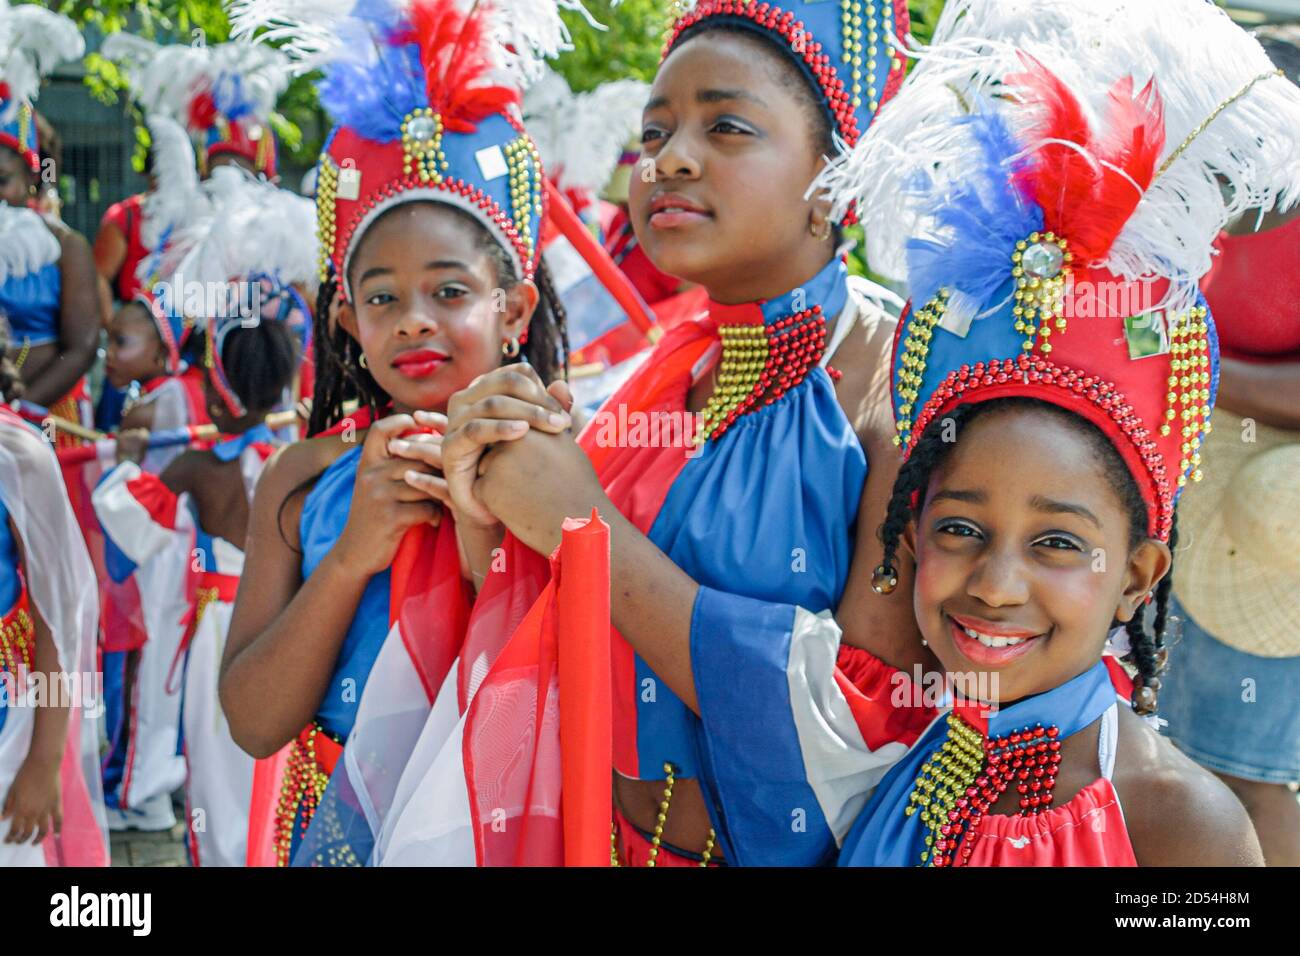 Florida Ft. Fort Lauderdale Caribbean Mardi Gras Junior Carnival,hand crafted handmade parade costumes costume outfit outfits,girl girls wear weating Stock Photo